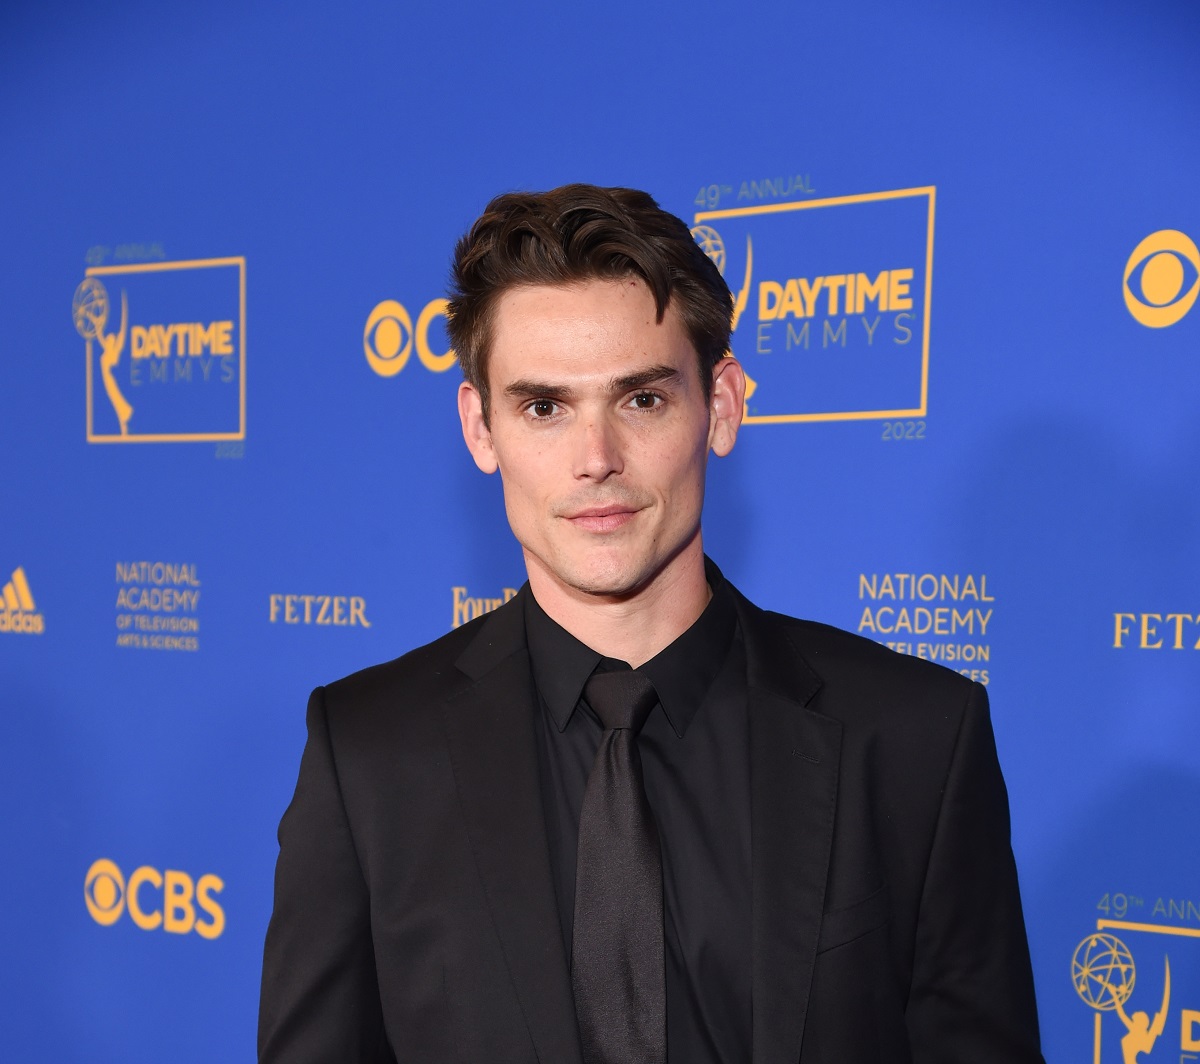 'The Young and the Restless' star Mark Grossman wearing a black suit and posing on the red carpet of the 2022 Daytime Emmys.